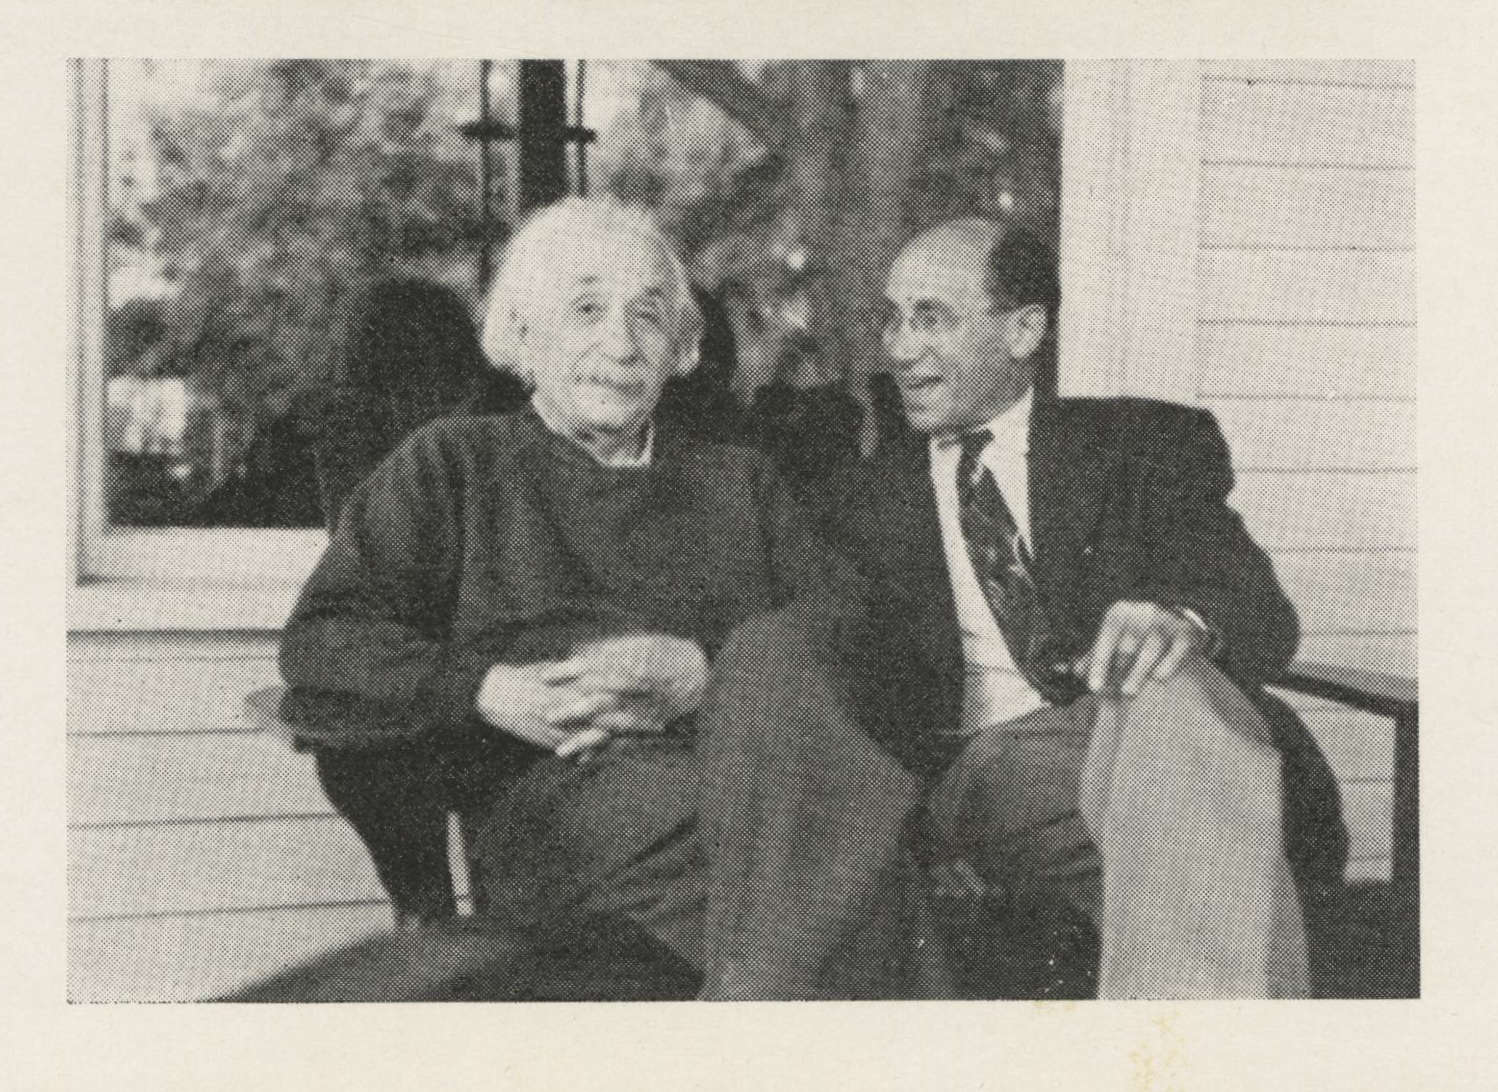 Vintage black-and-white photograph of Albert Einstein sitting on a porch bench with Frank Gerald Beck.